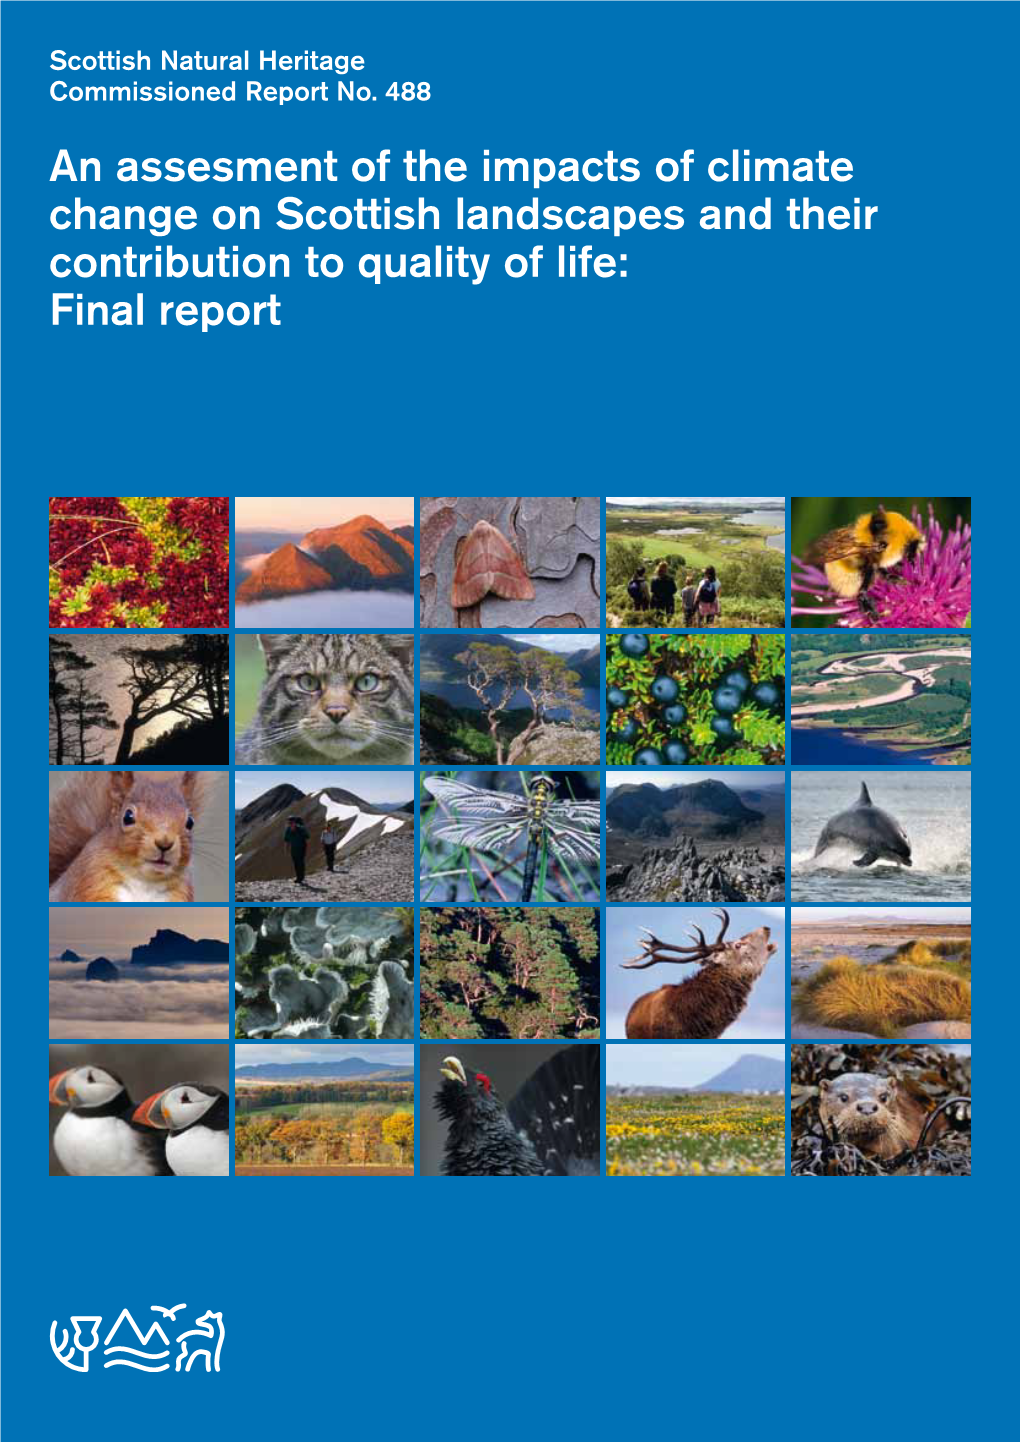 An Assesment of the Impacts of Climate Change on Scottish Landscapes and Their Contribution to Quality of Life: Final Report